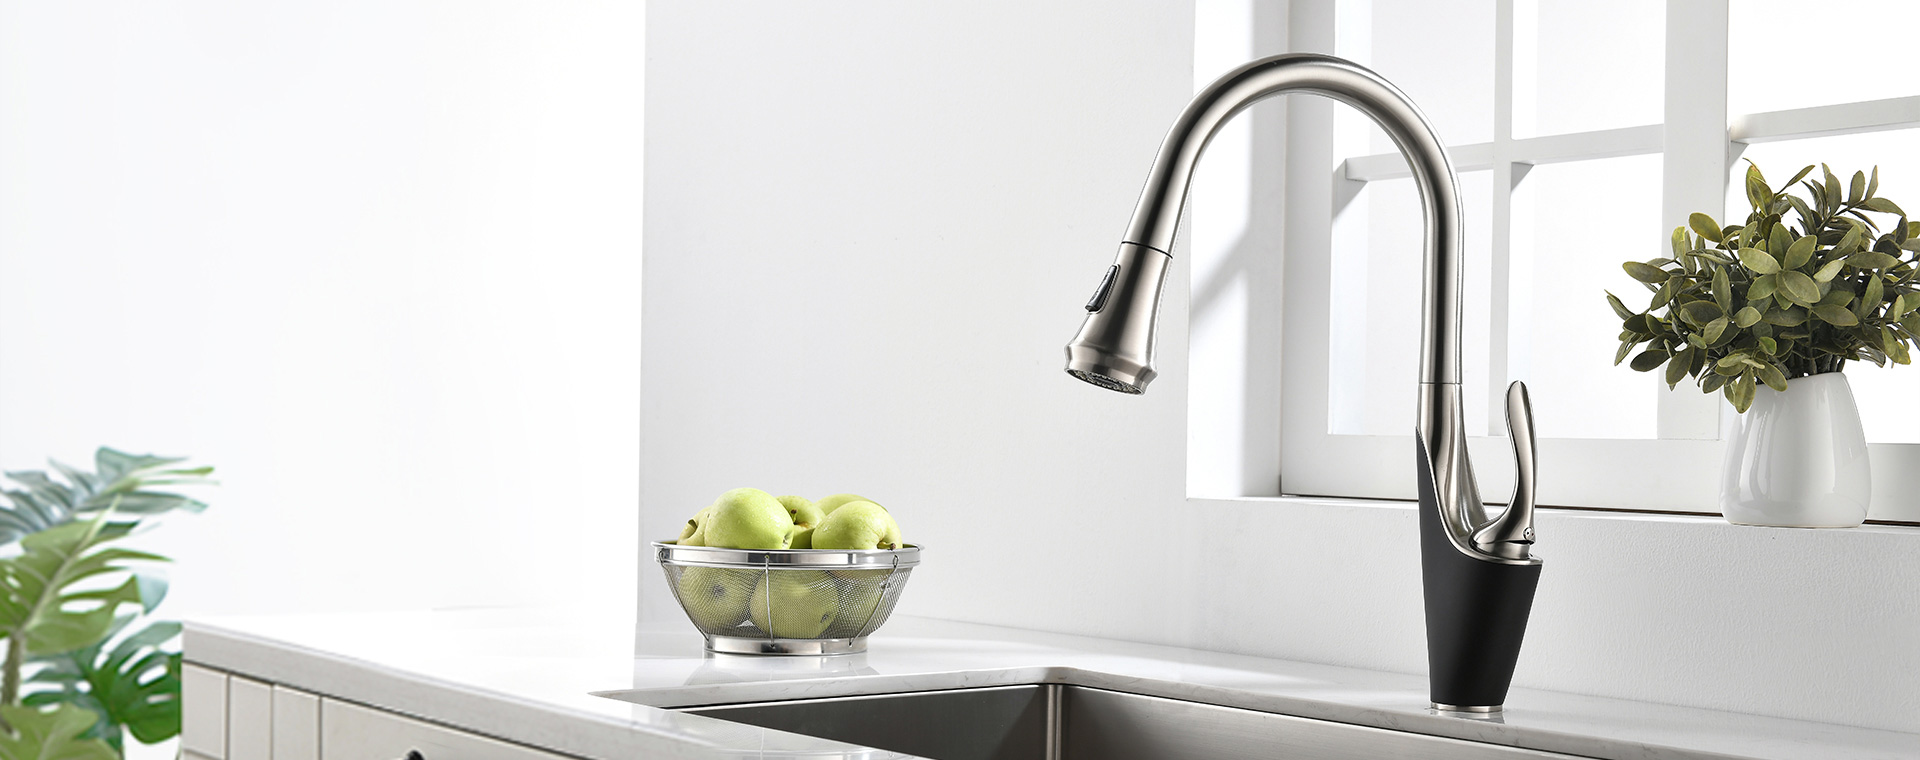 Faucet with Double Handles